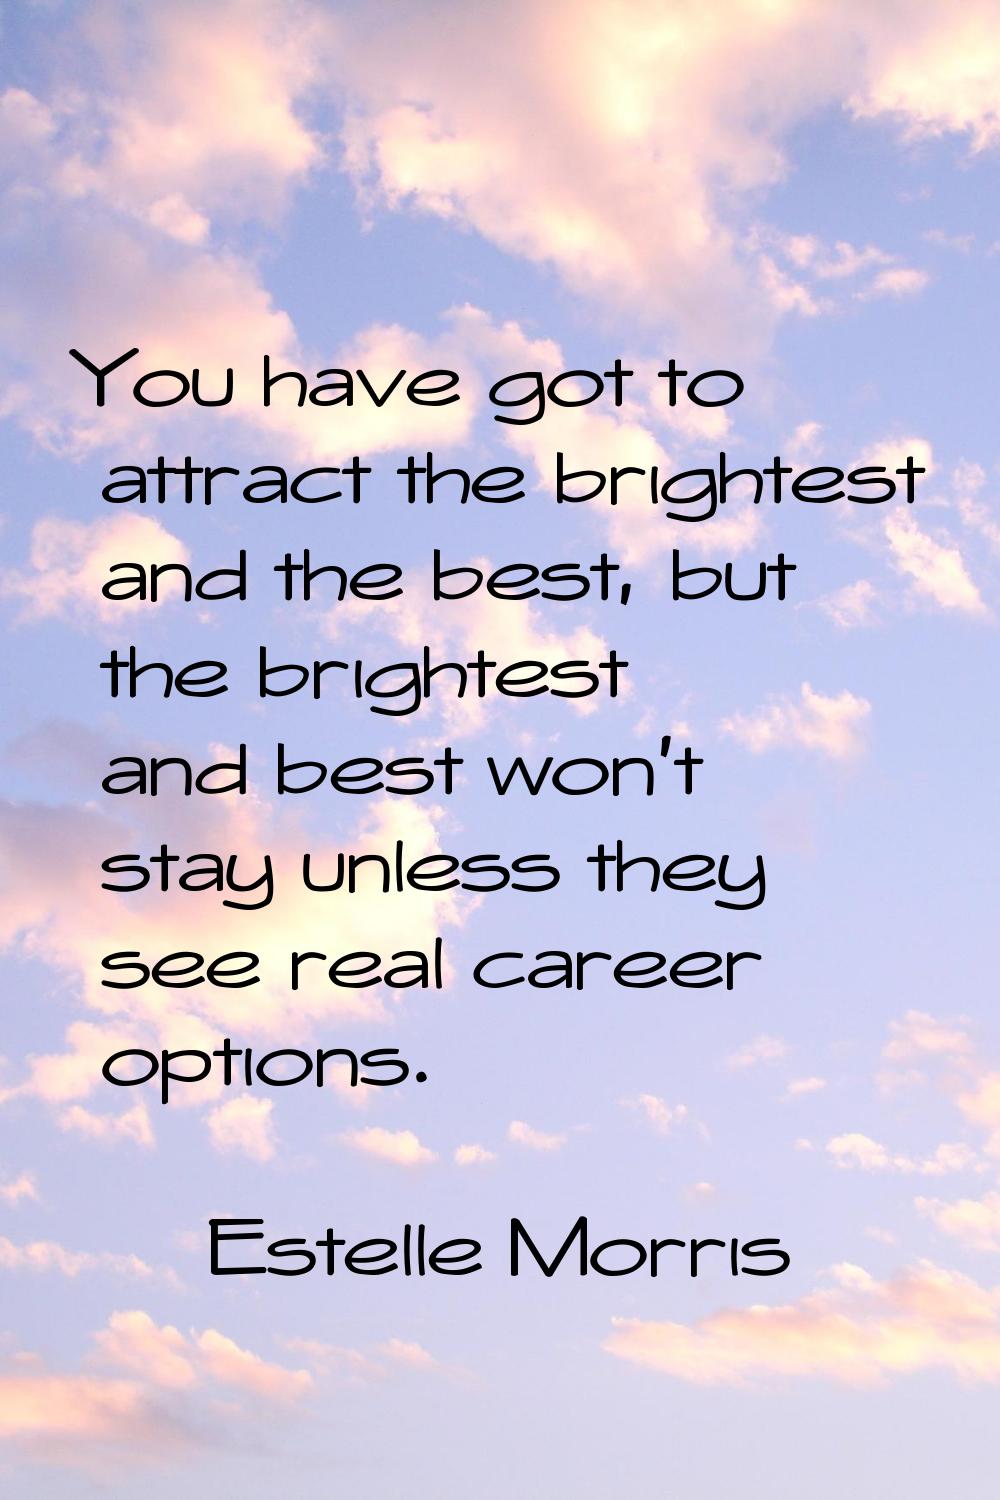 You have got to attract the brightest and the best, but the brightest and best won't stay unless th